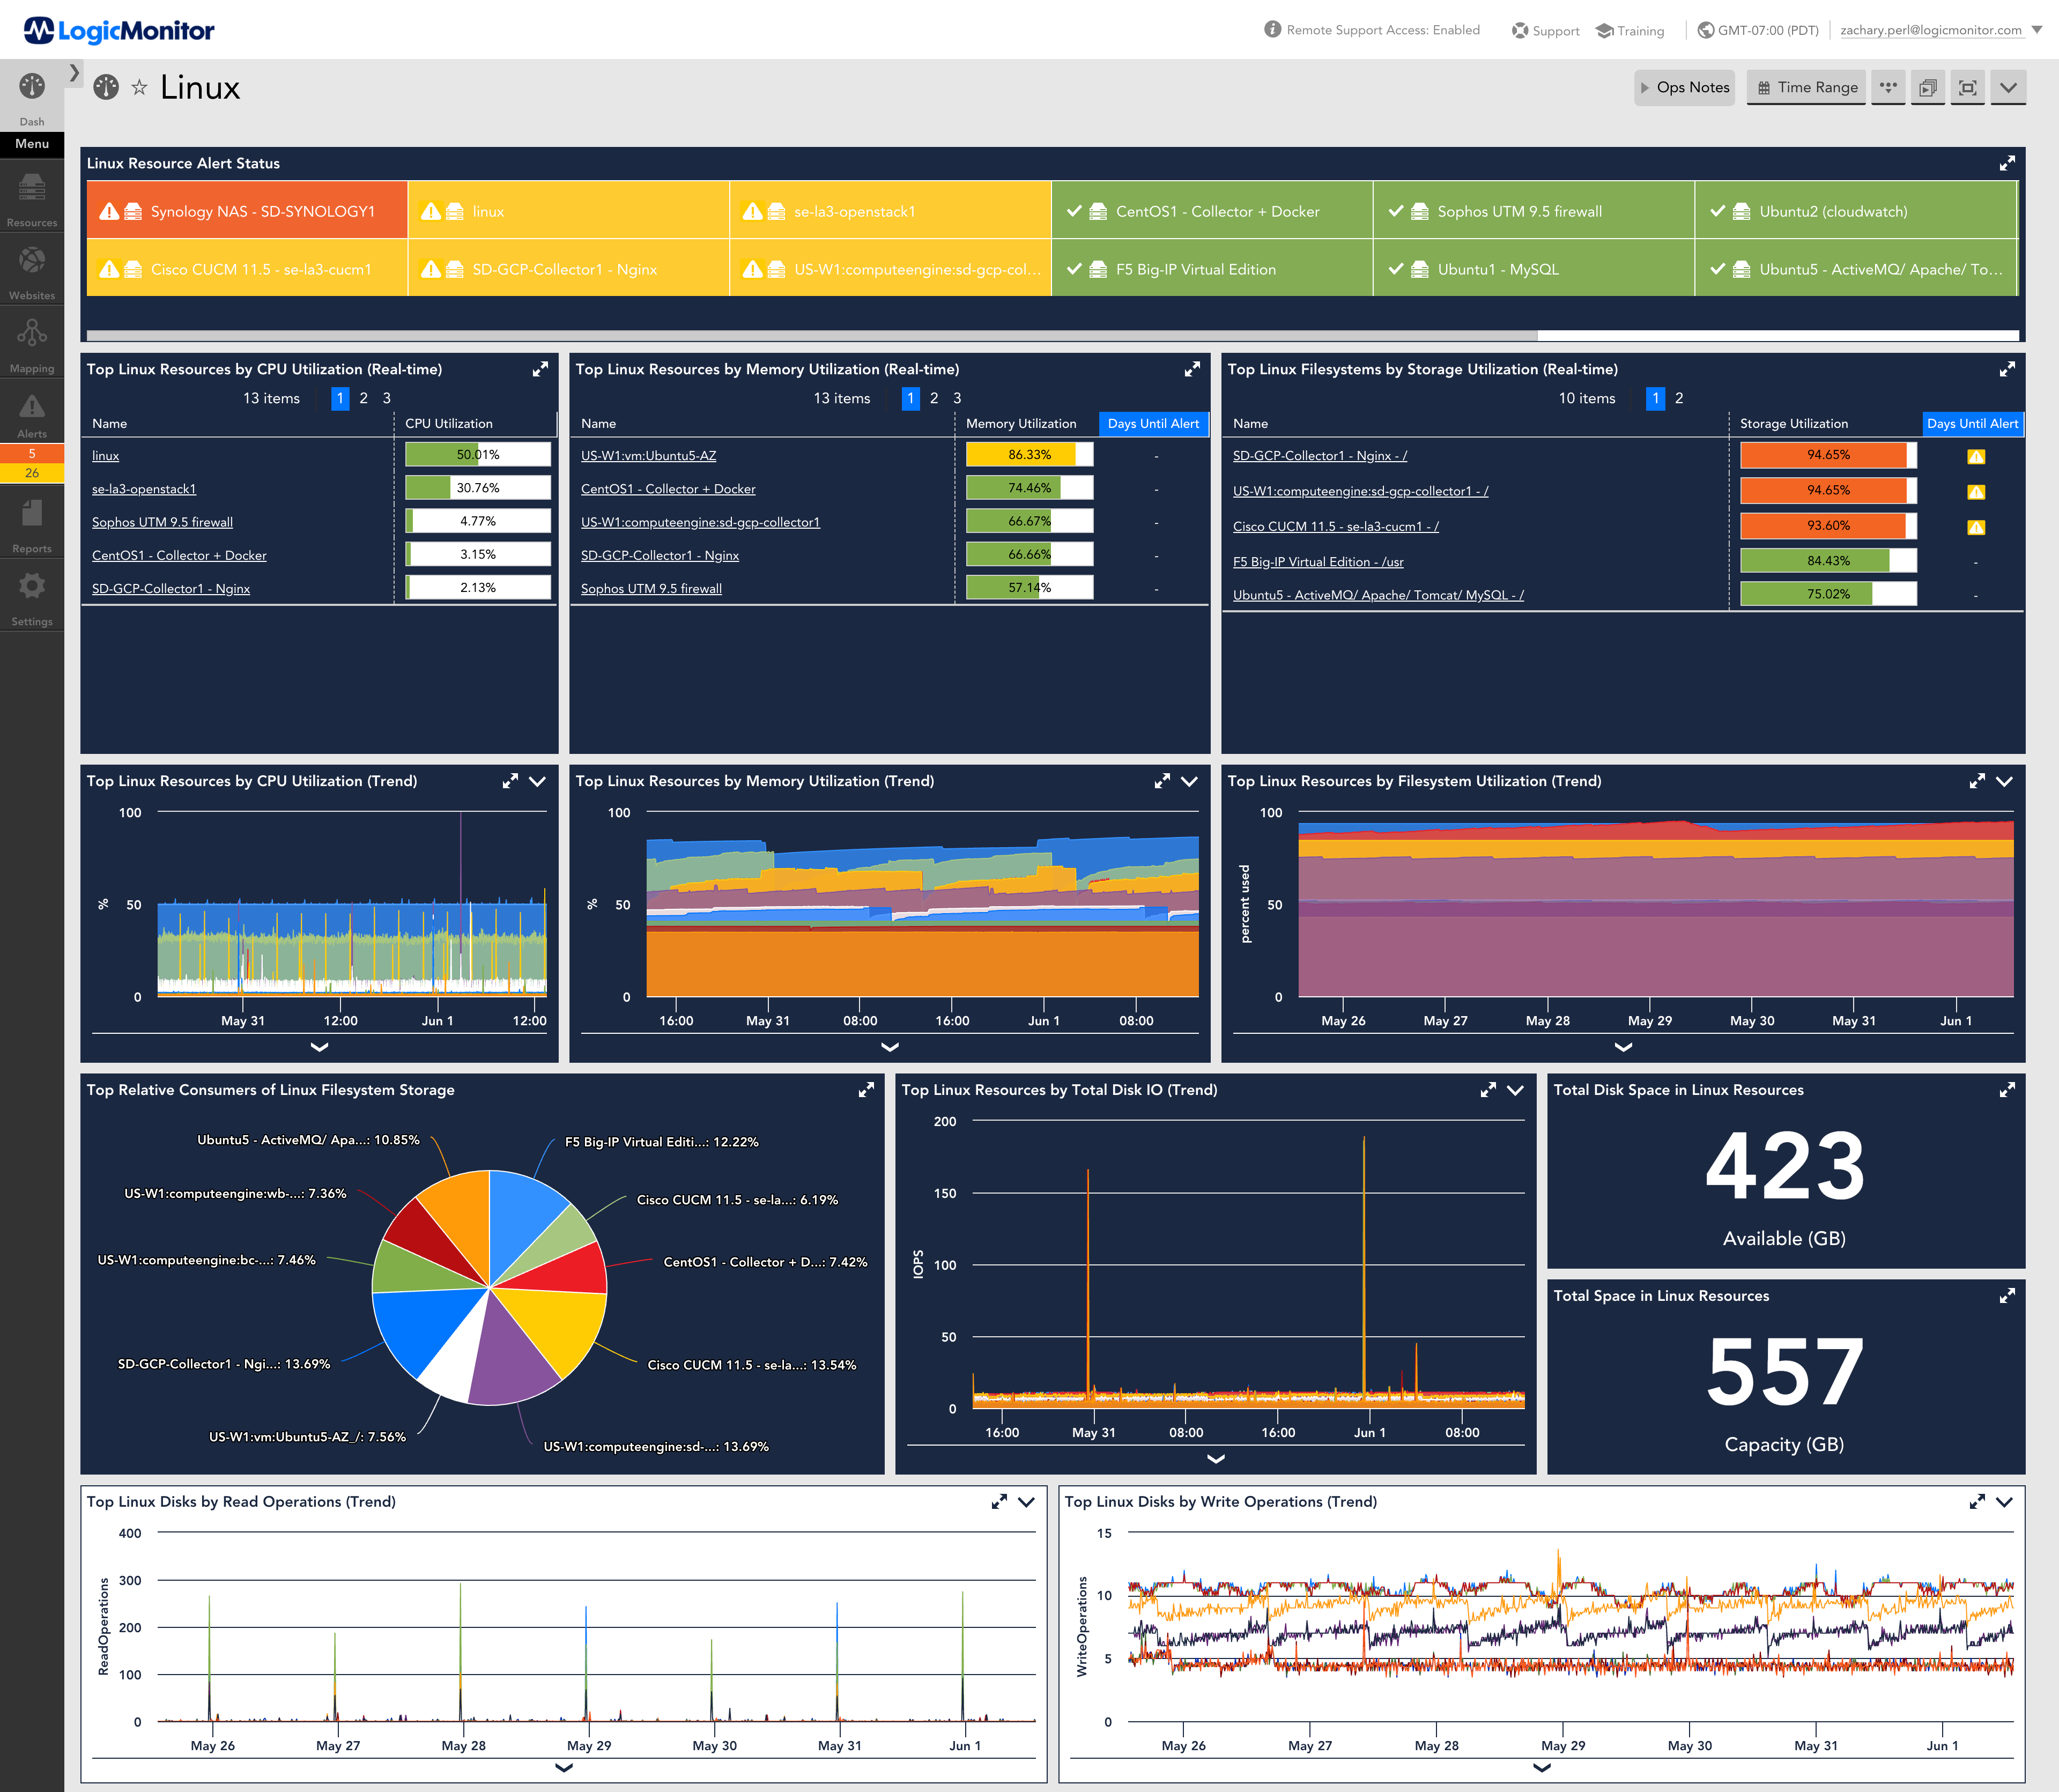 Linux performance monitoring overview dashboard.